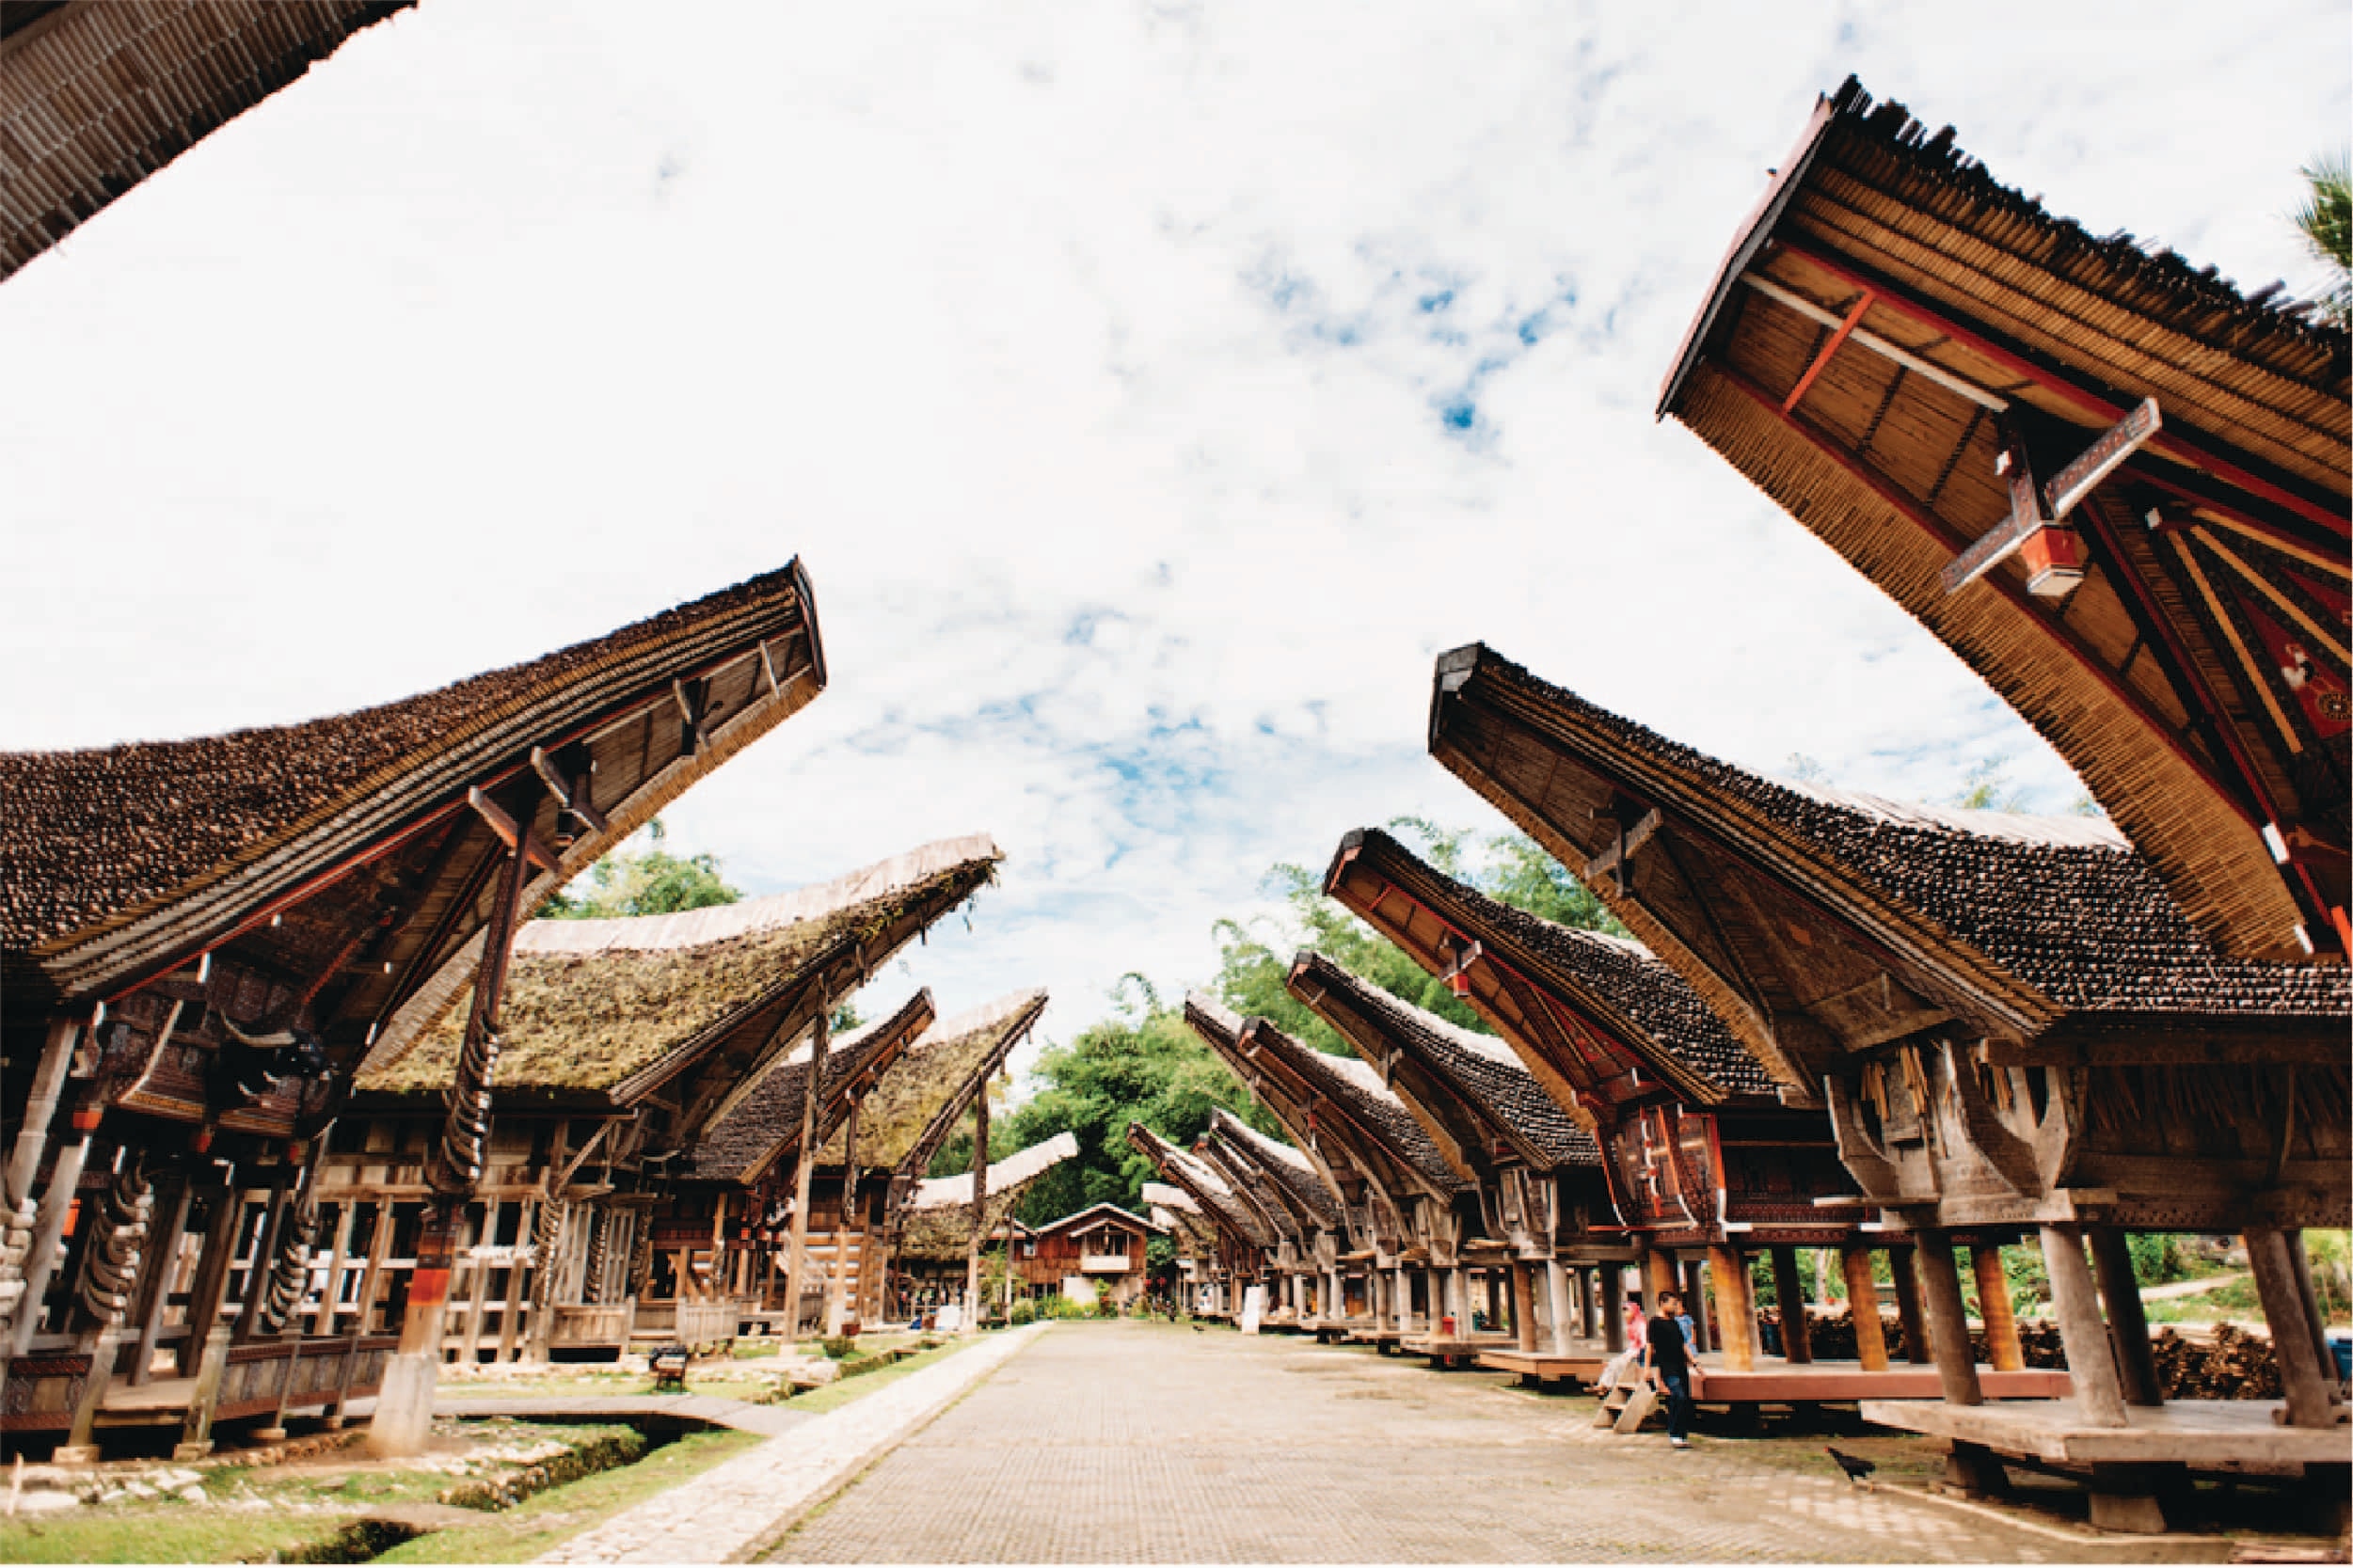 9 Things You Should Add to Your Must-Do List in Tana Toraja